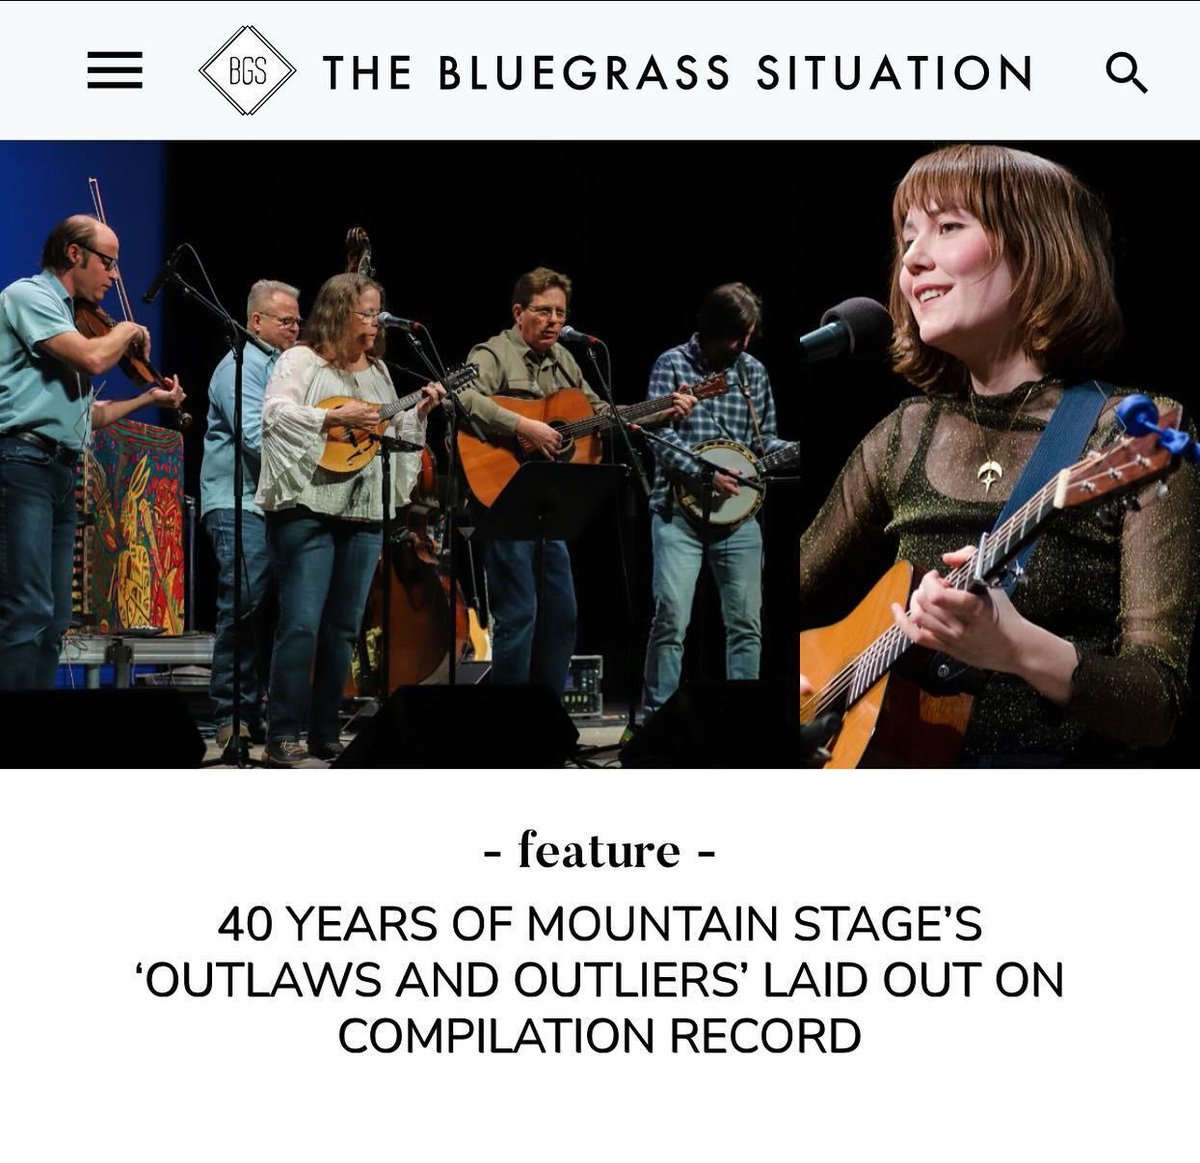 The Bluegrass Situation caught up with Molly Tuttle, Tim O'Brien and Larry Groce to discuss our new compilation album and the 40-year legacy of Mountain Stage. buff.ly/4aUoMtO